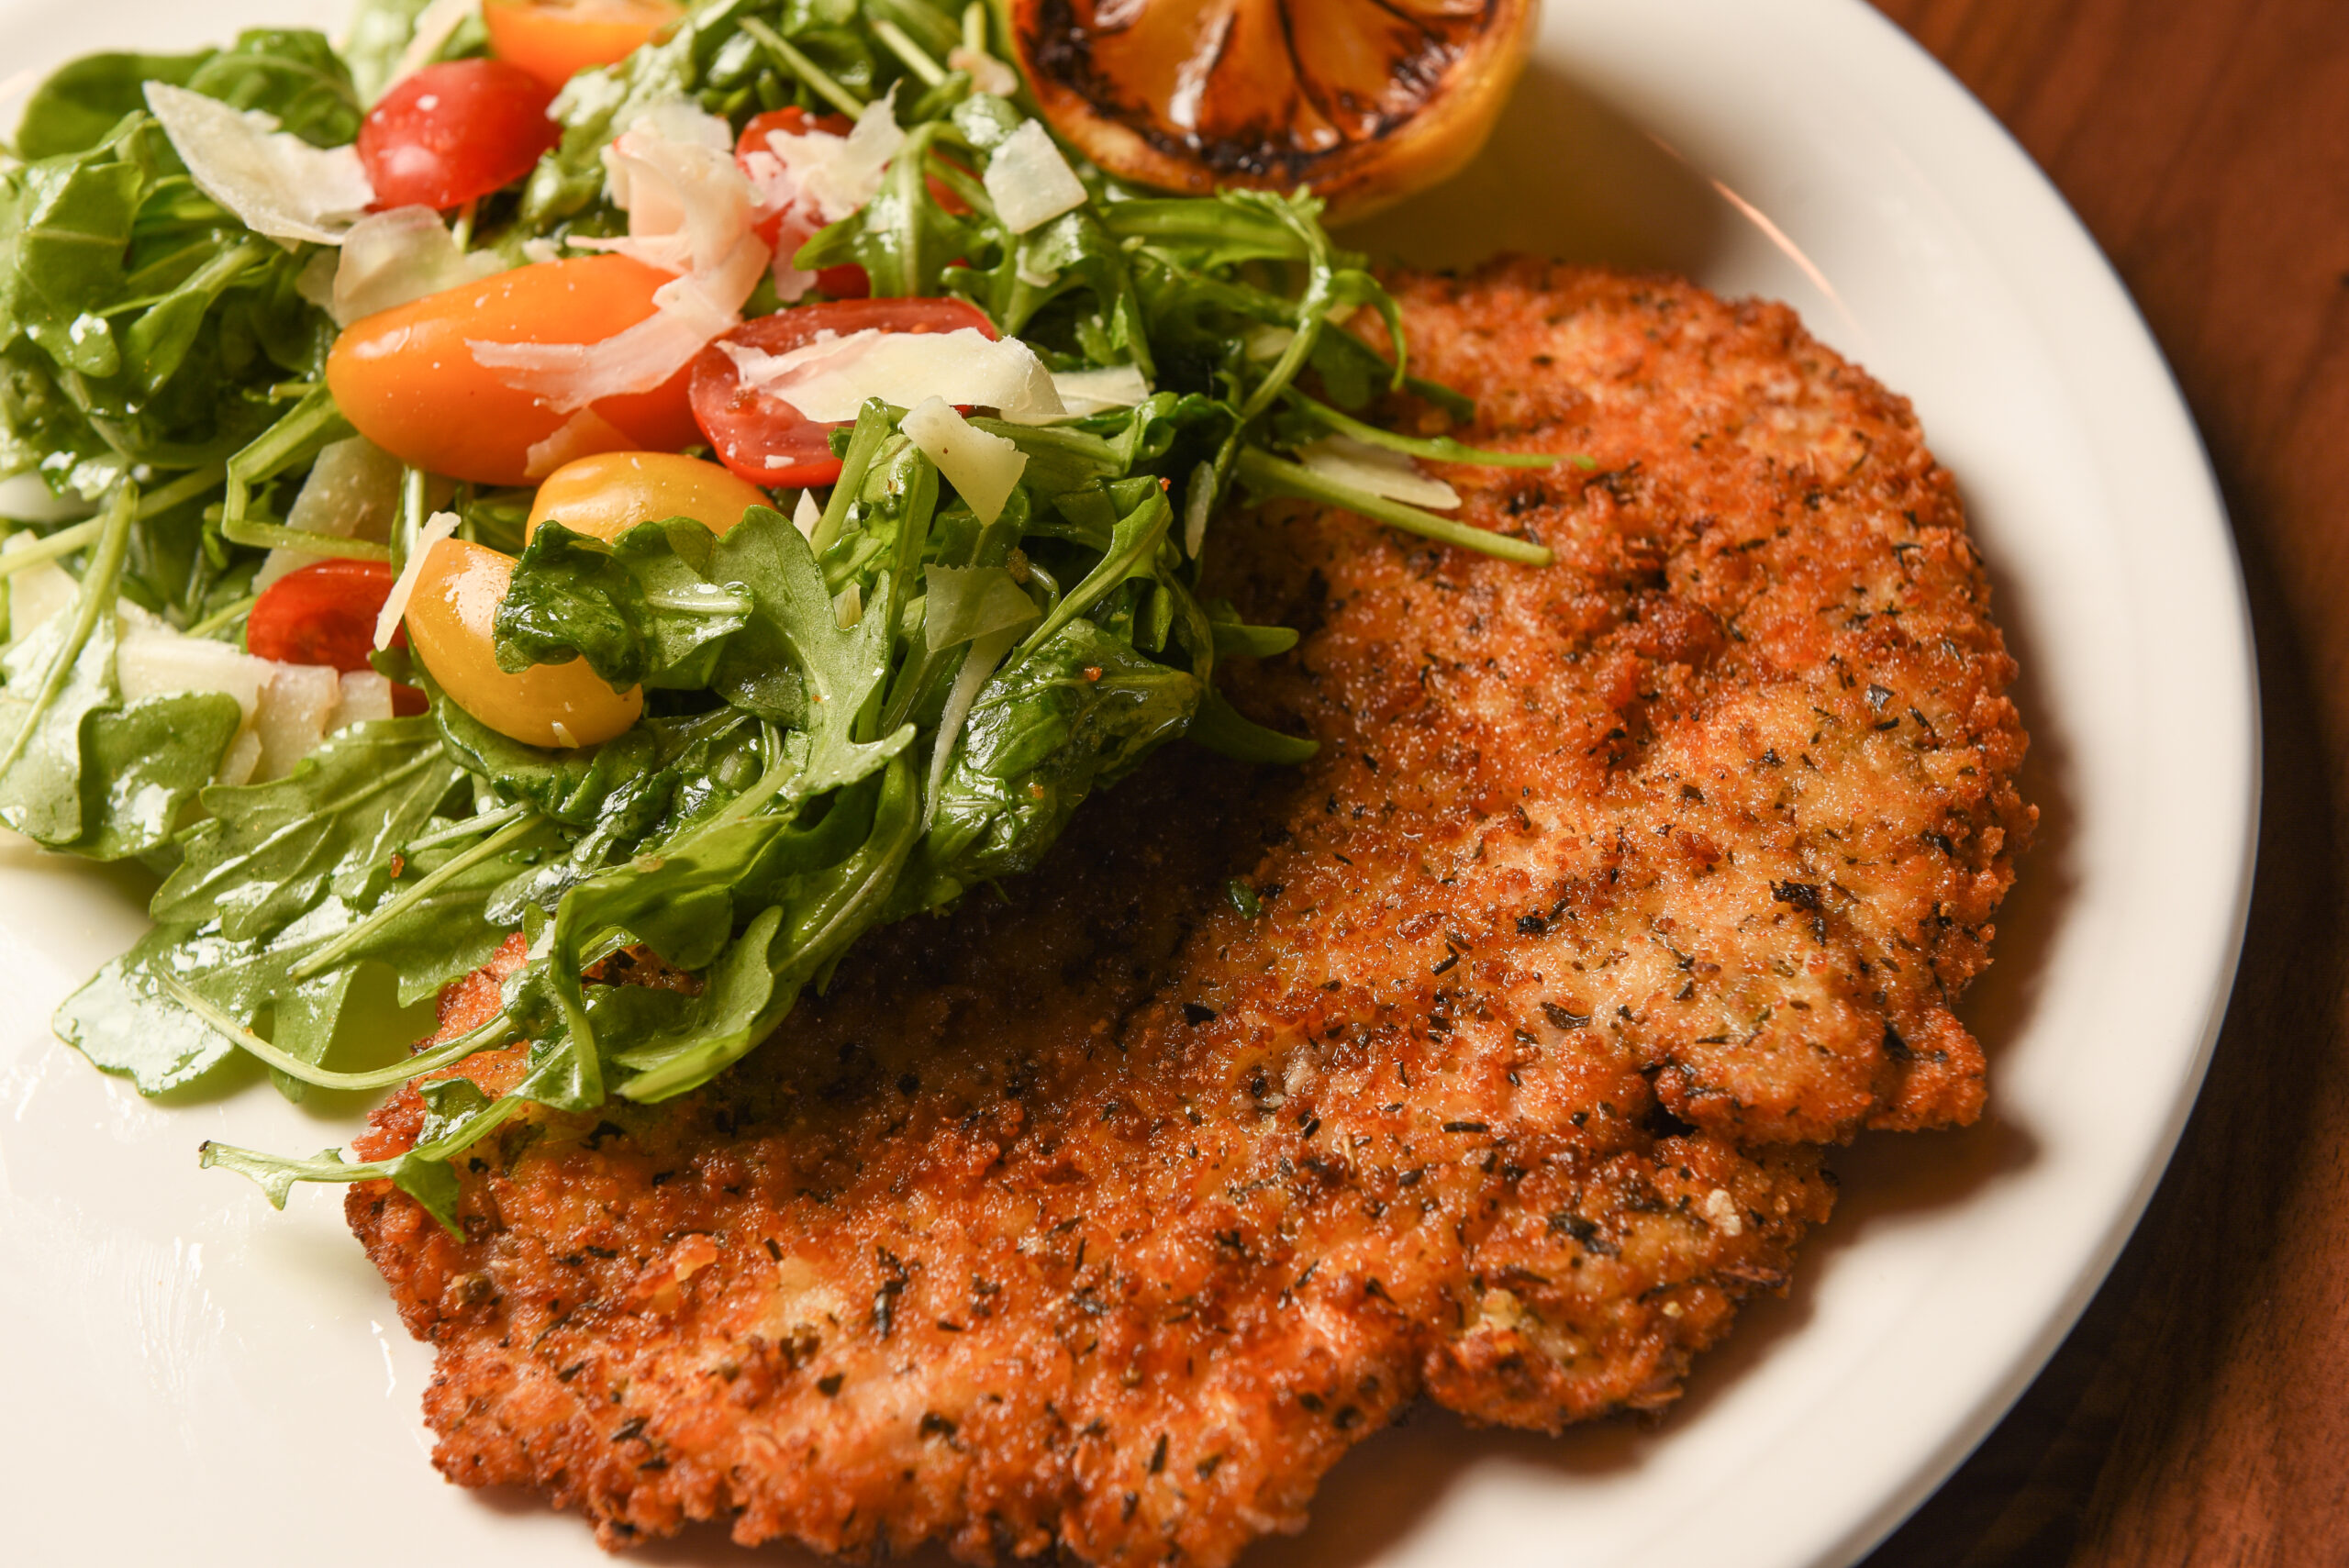 Chicken Milanese with arugula salad scaled